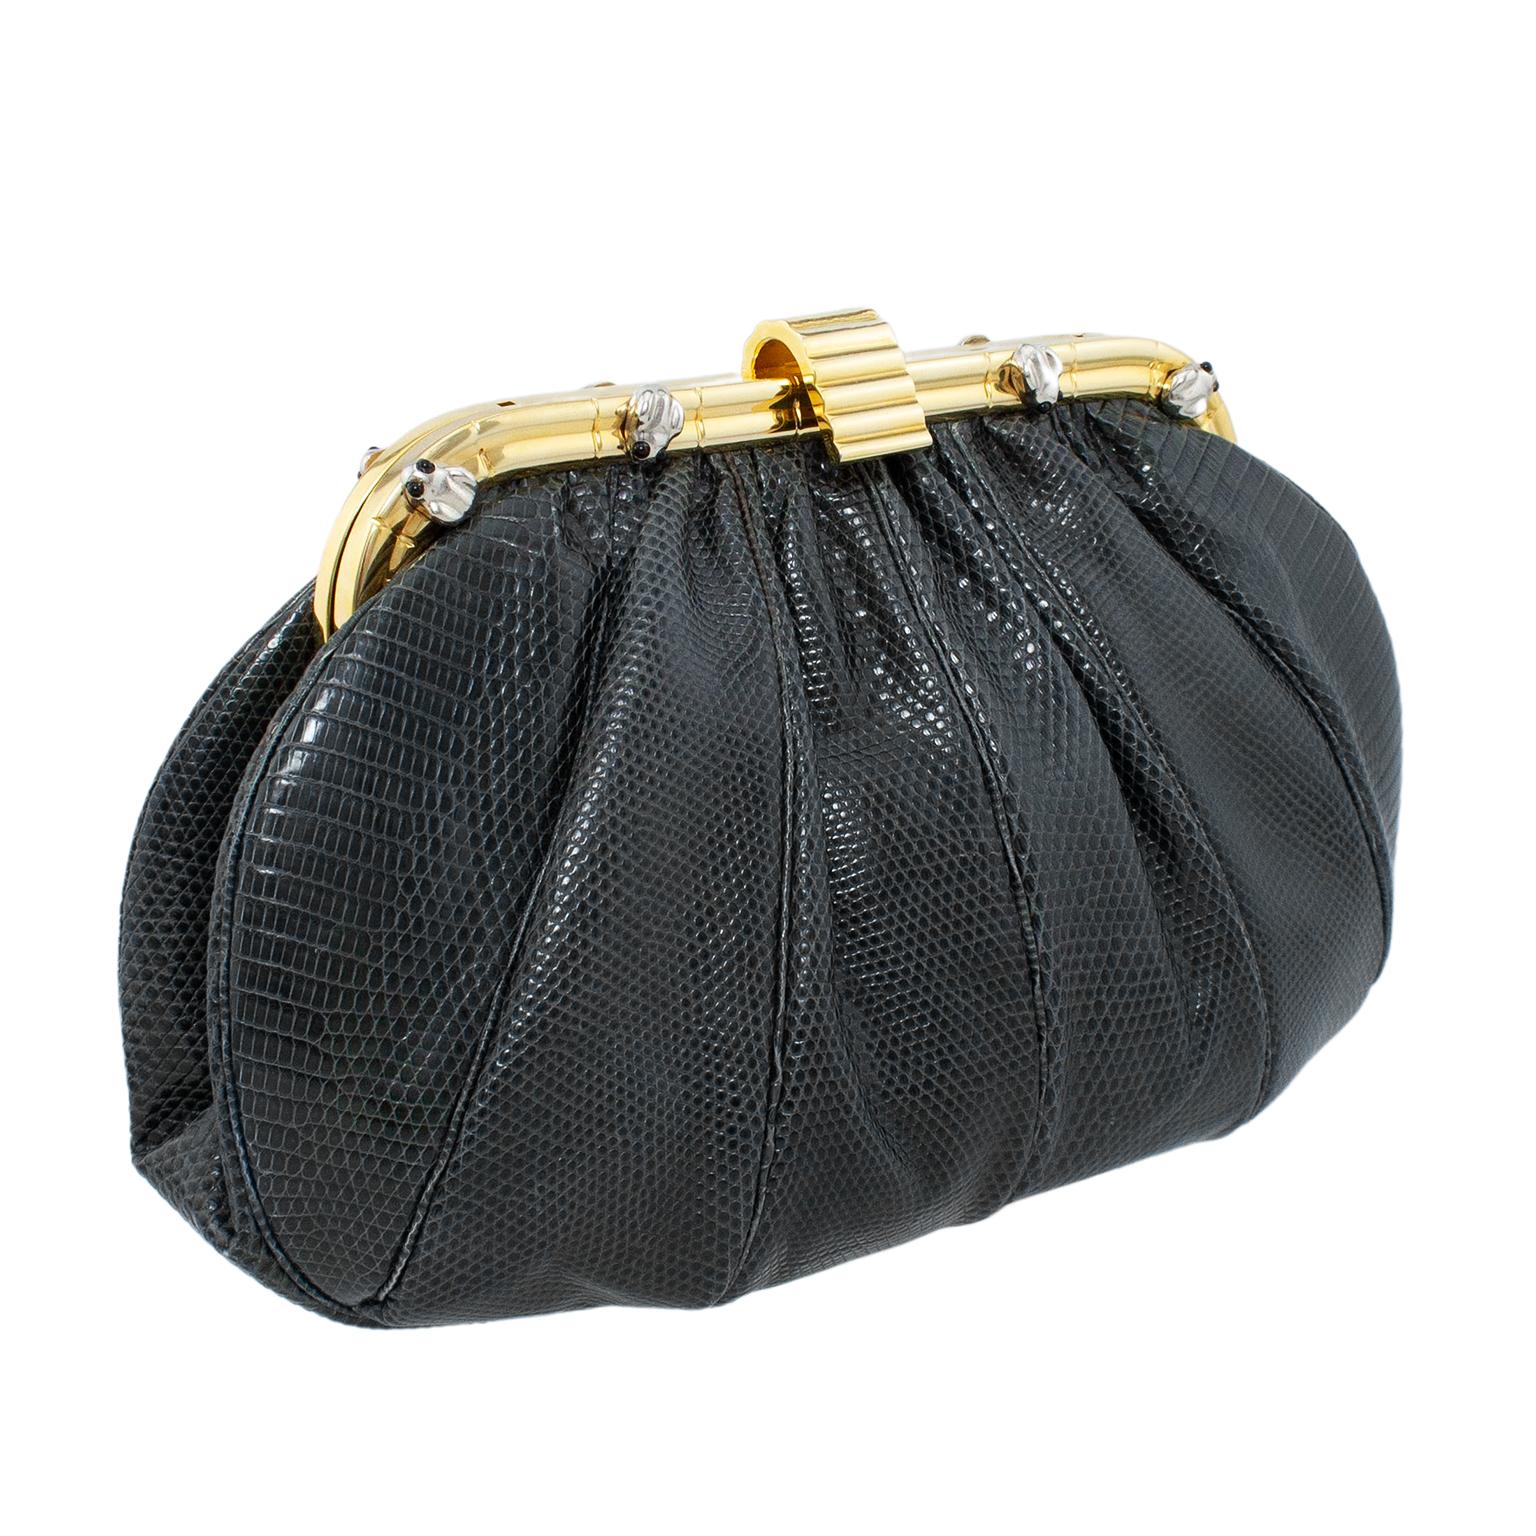 Very fun Judith Leiber evening clutch from the 1980s. Frame shape with a dark grey reptile and gold tone metal hardware that is embellished with small silver tone metal frogs with black eyes. Optional 20